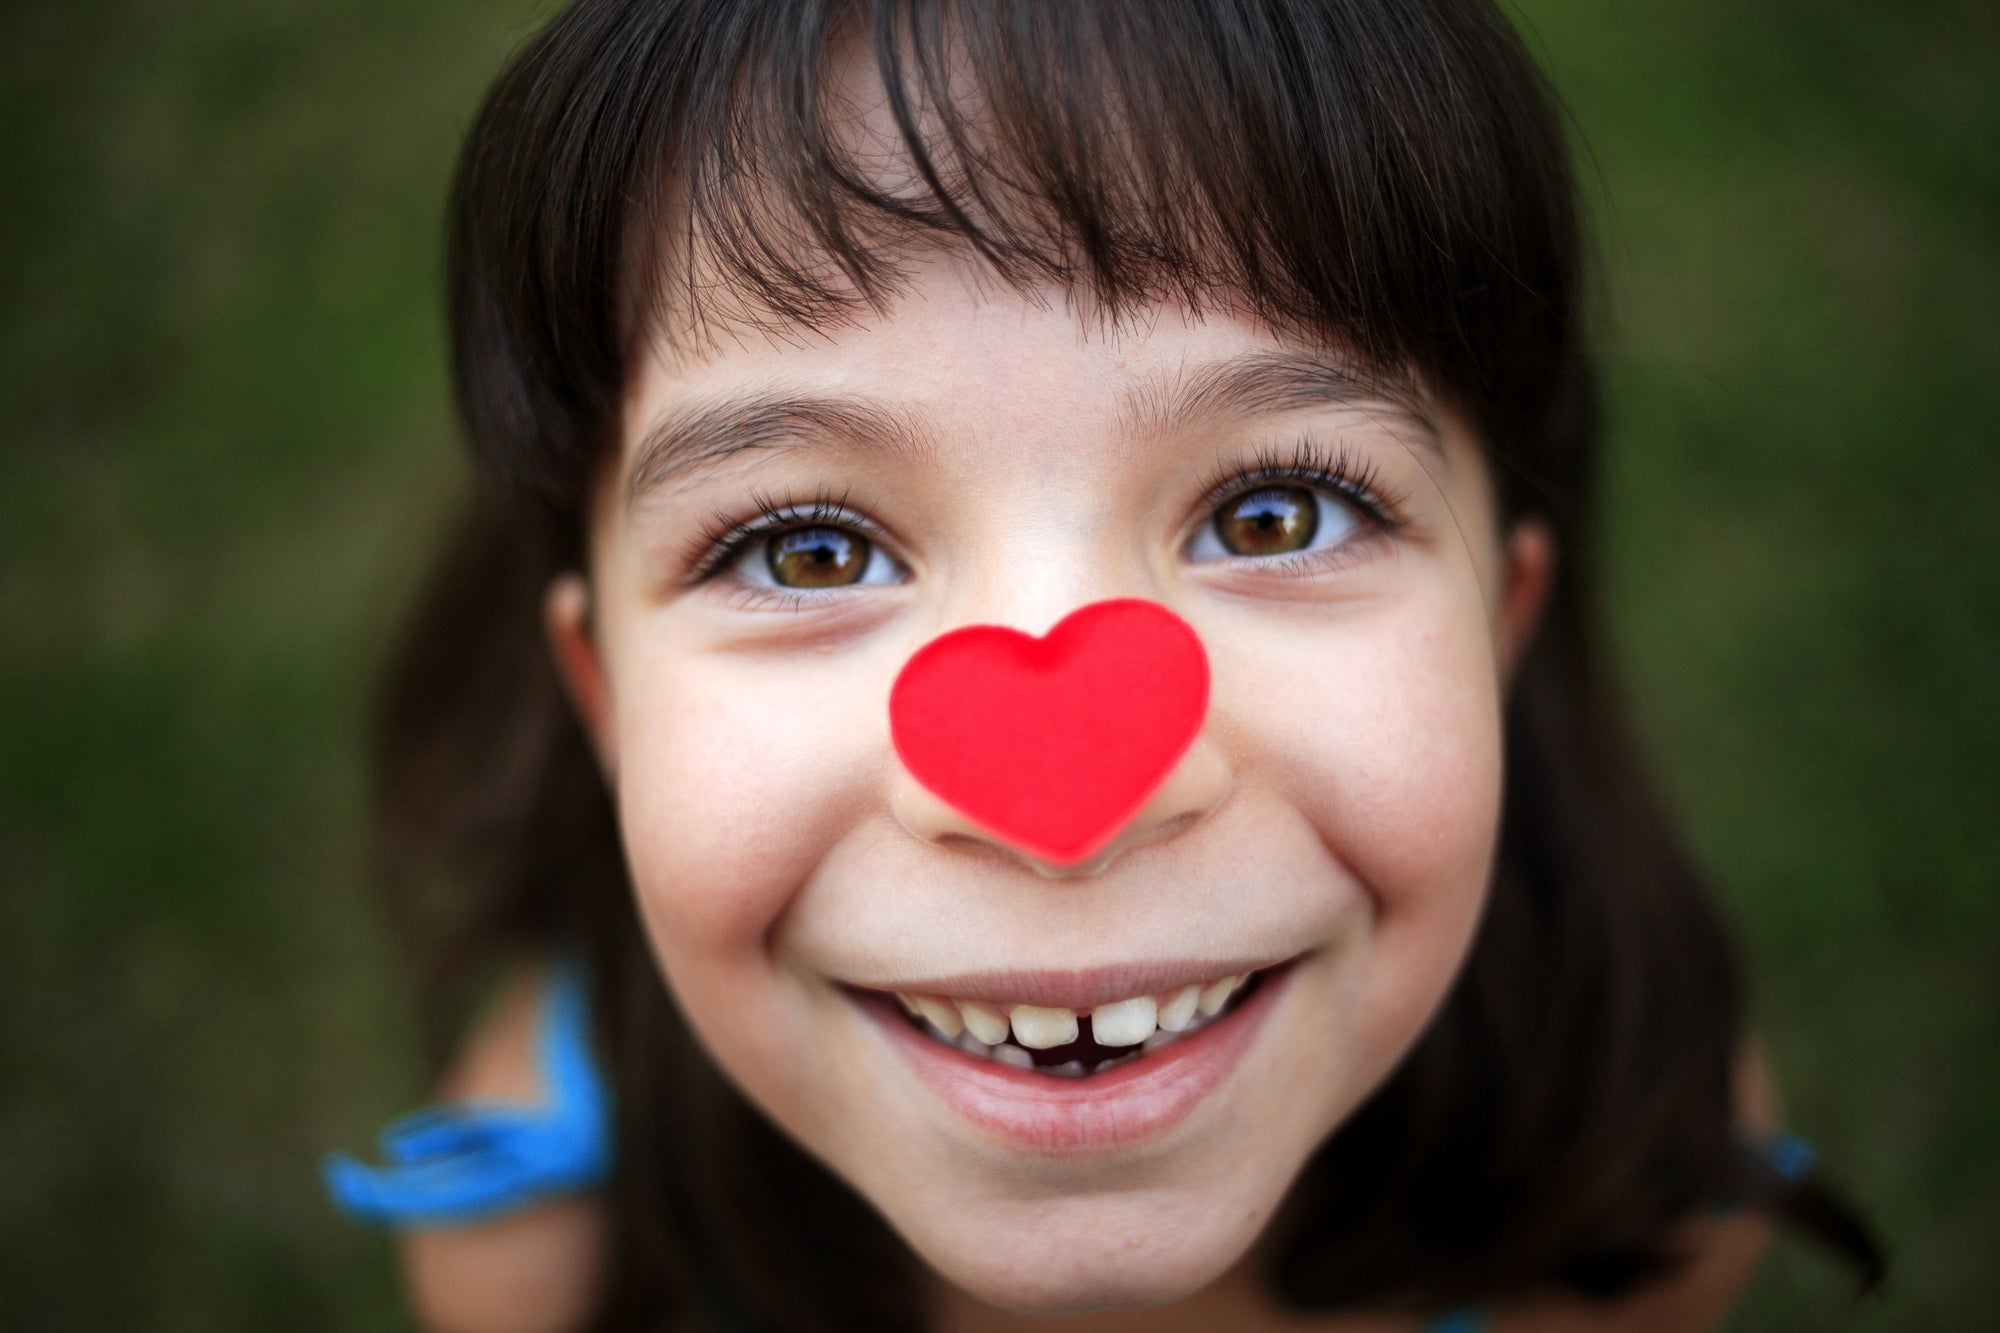 little girl looking up,heart shaped paper on her nose